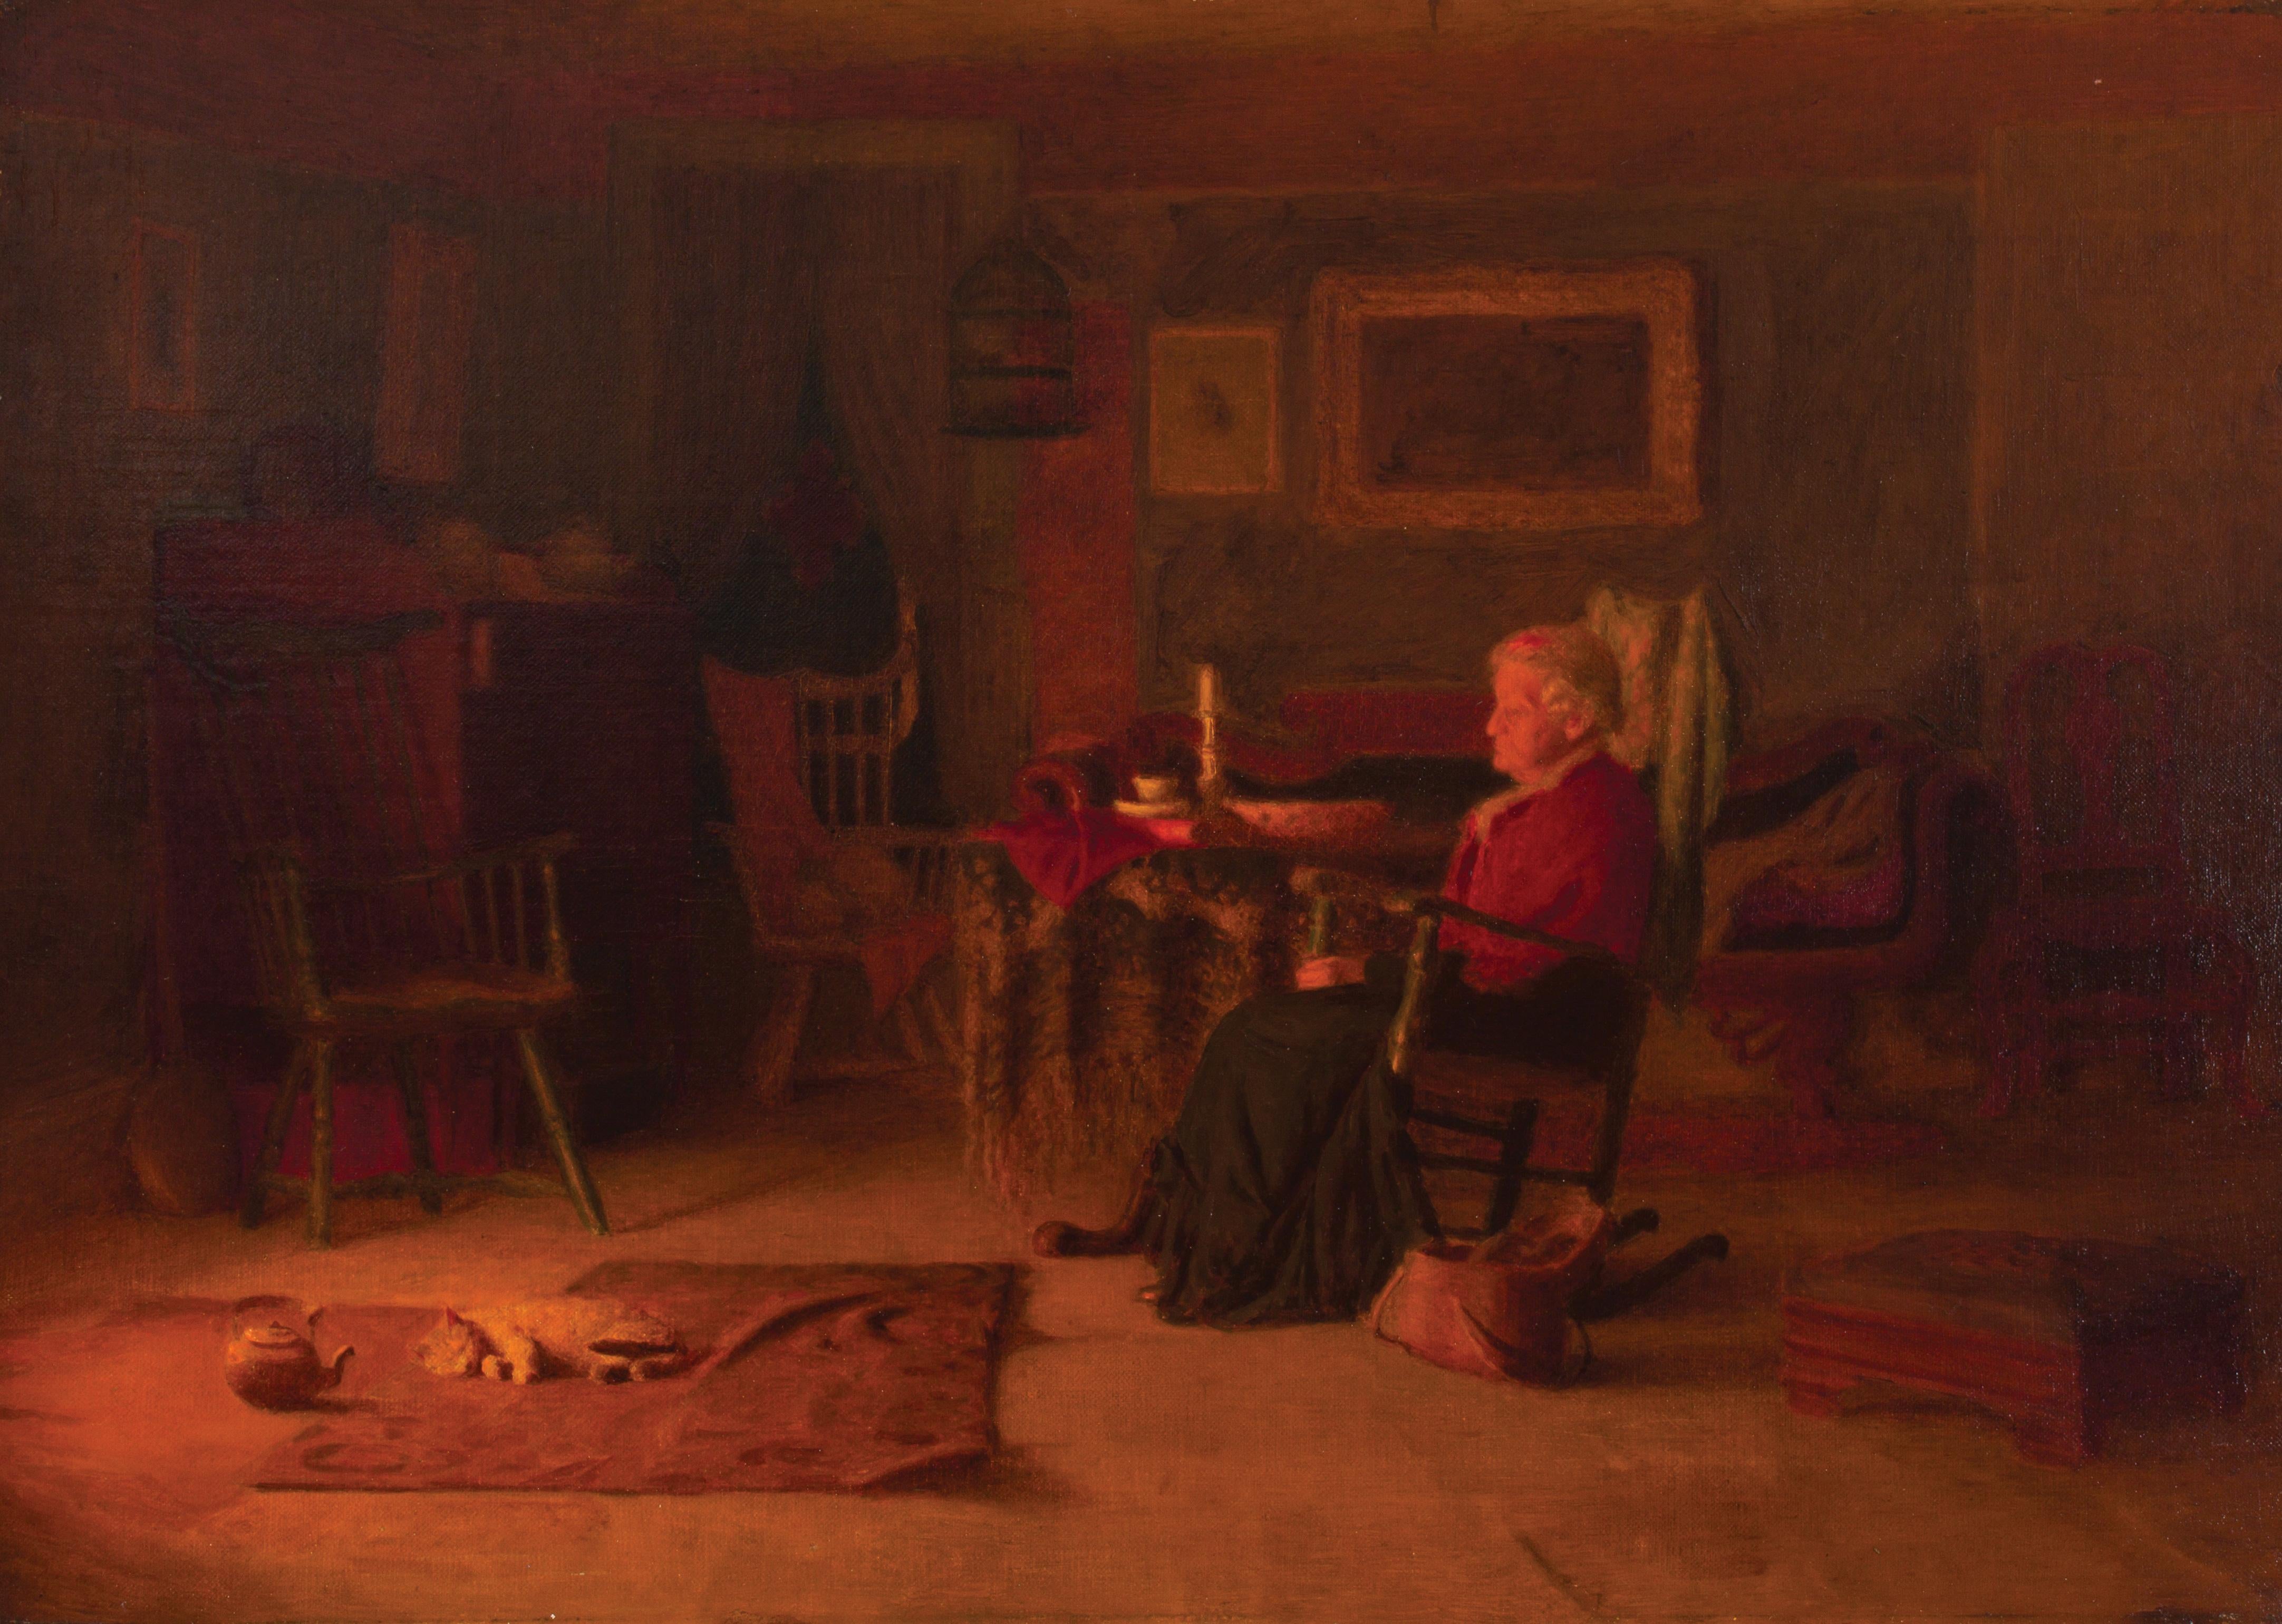 Sewing By The Hearth: interior scene w/ cat by Thomas Anshutz, student of Eakins - Painting by Thomas P Anshutz